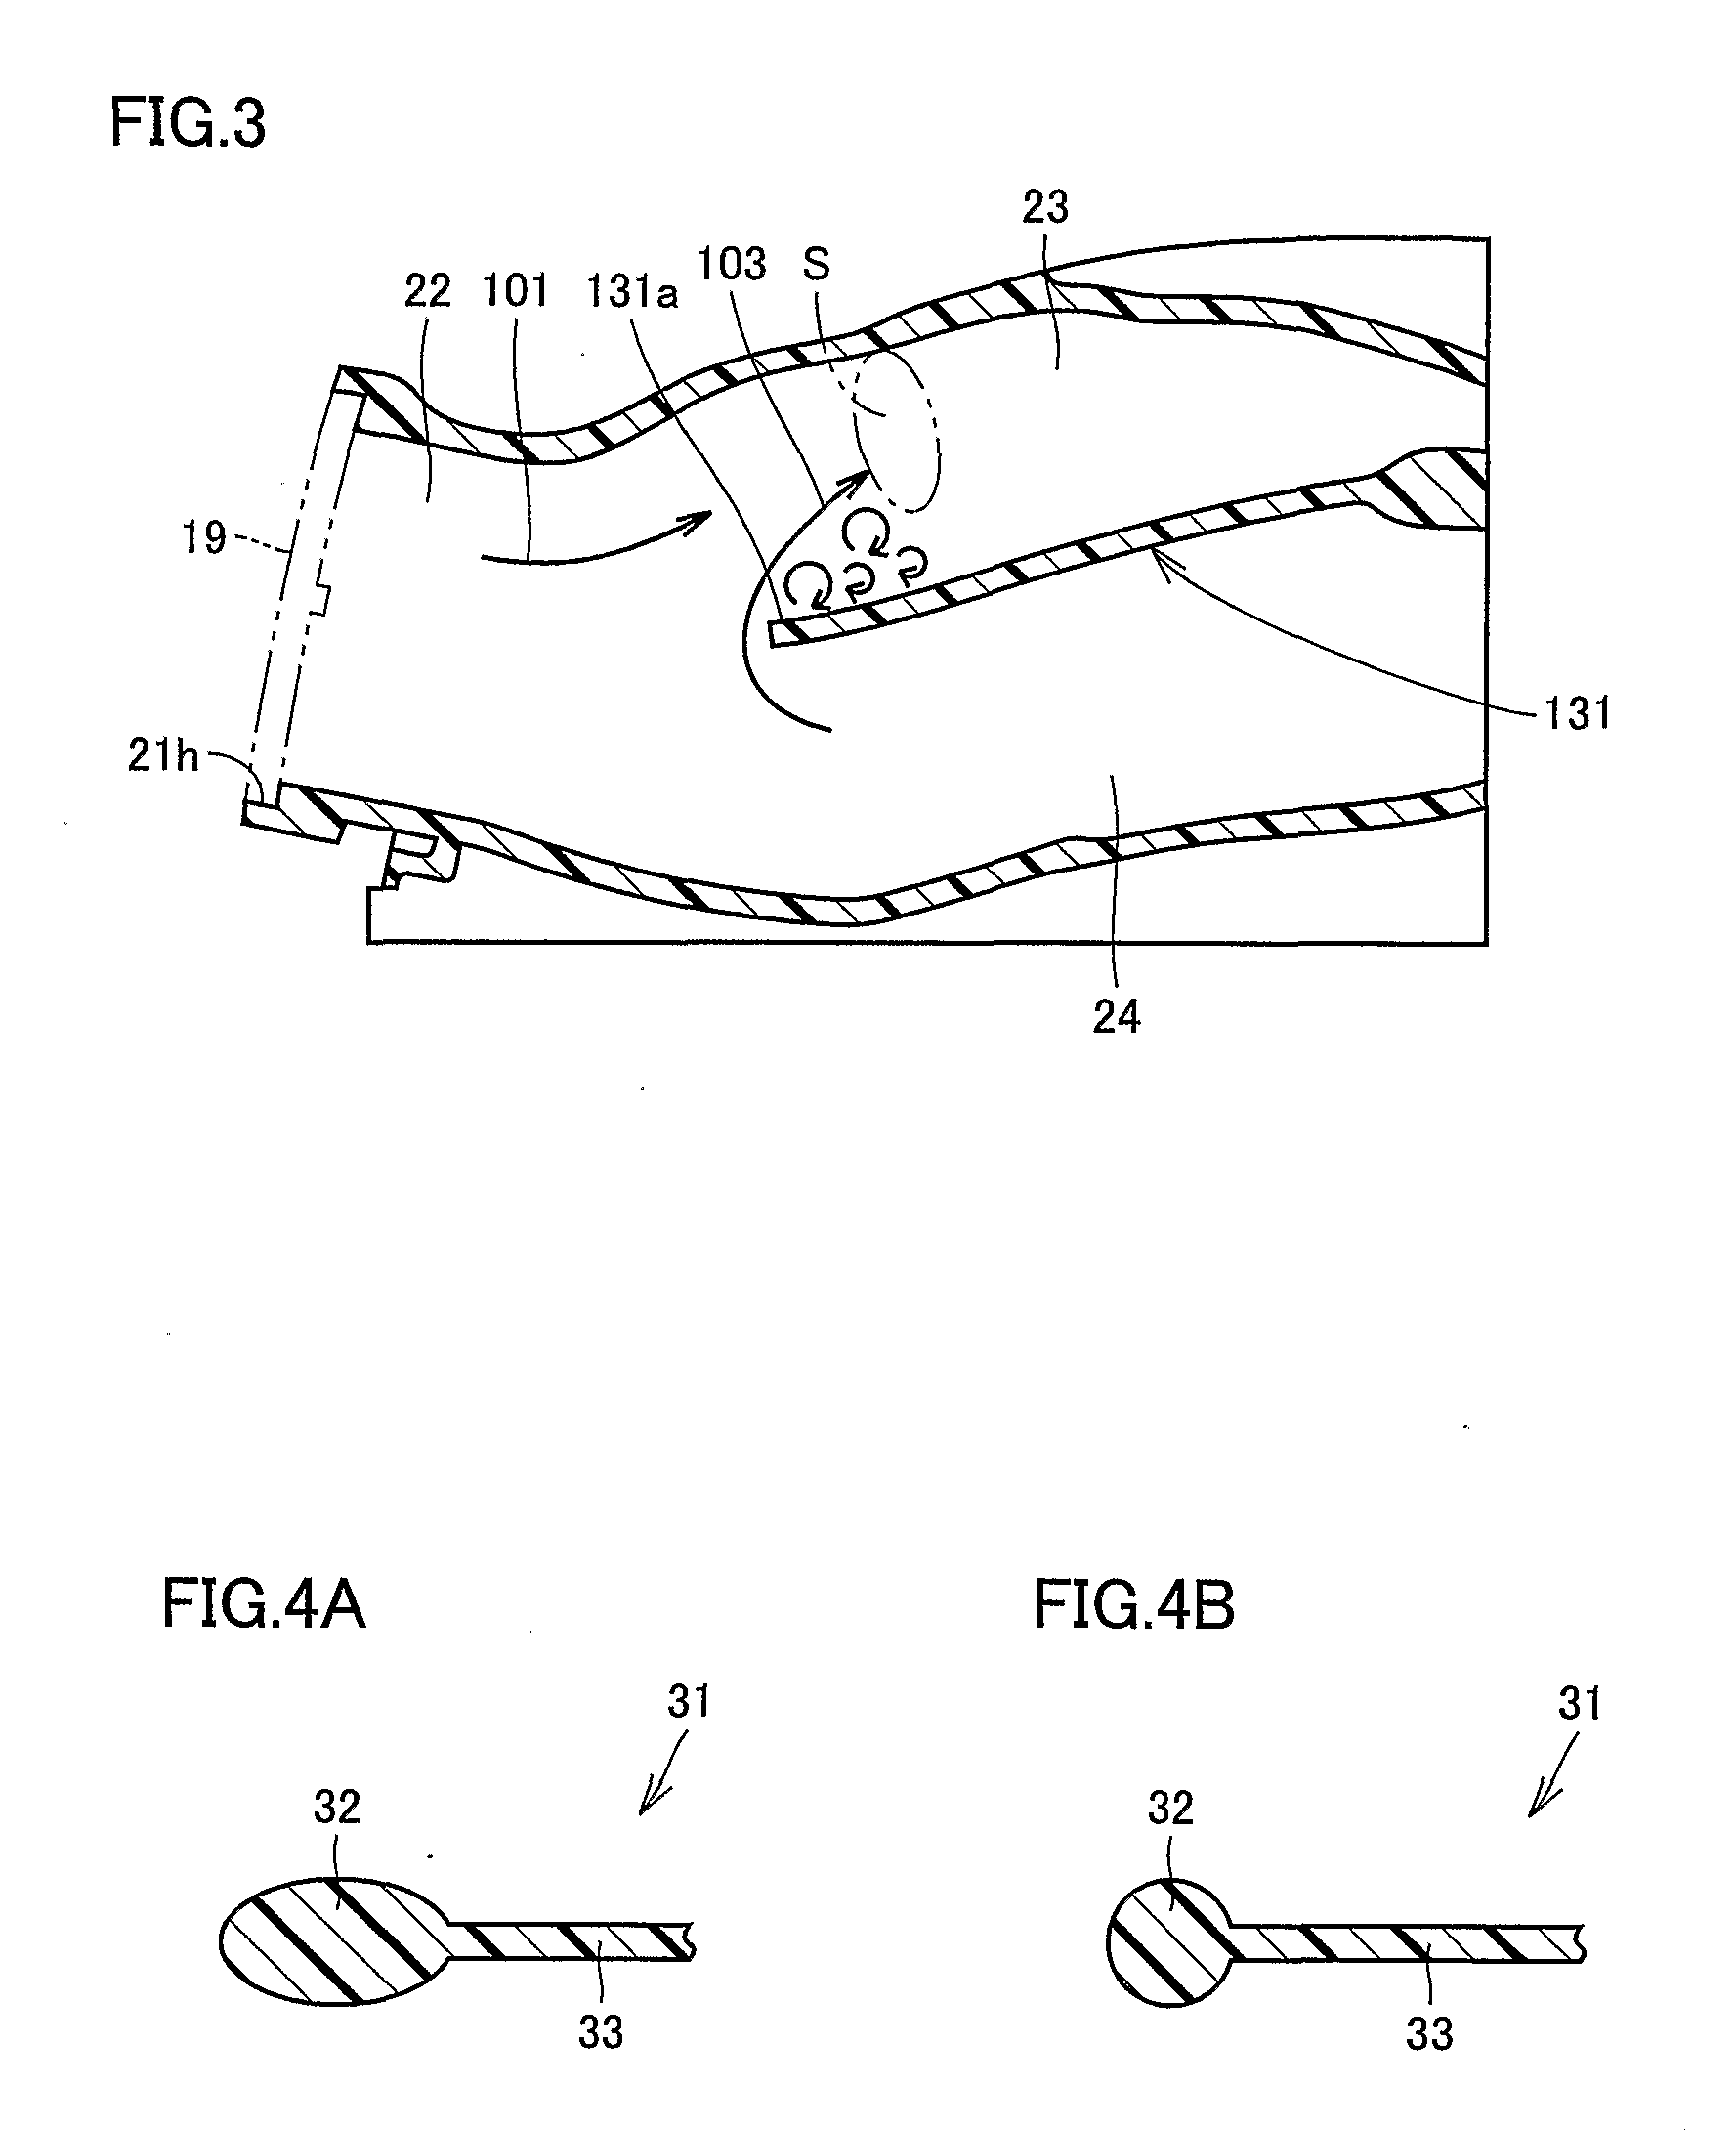 Intake pipe of internal combustion engine